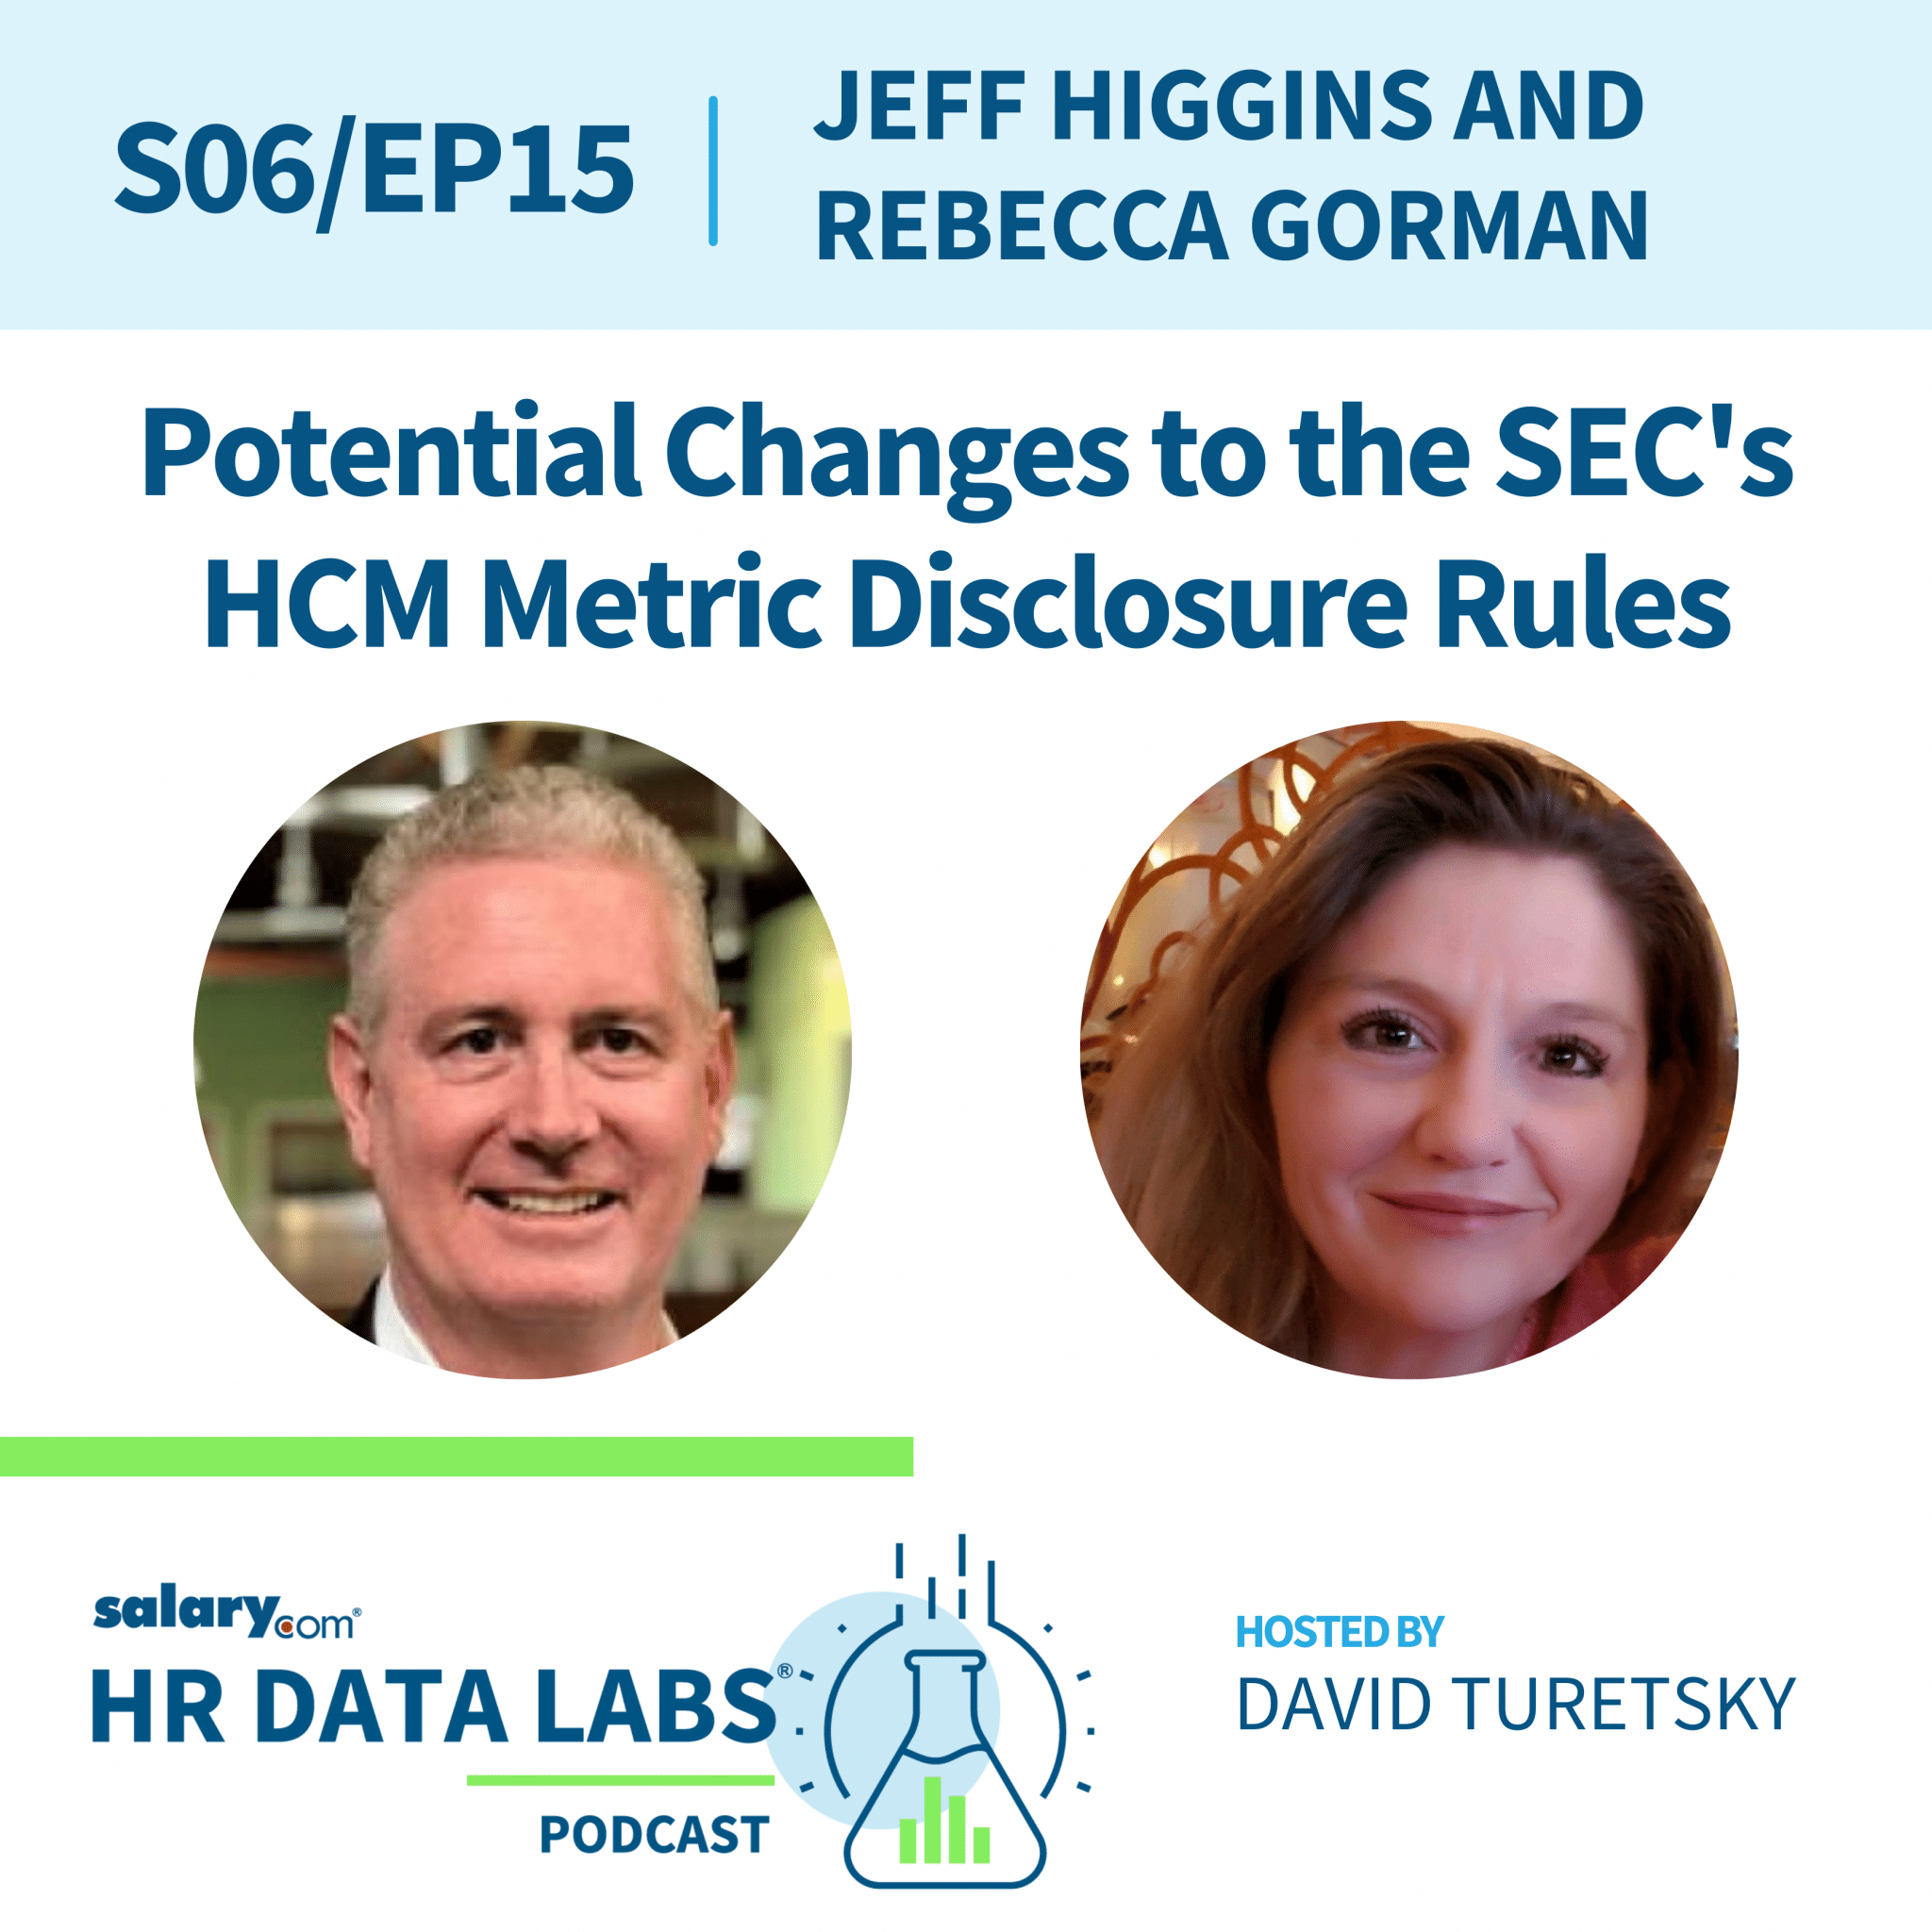 Jeff Higgins and Rebecca Gorman – Potential Changes to the SEC’s HCM Metric Disclosure Rules